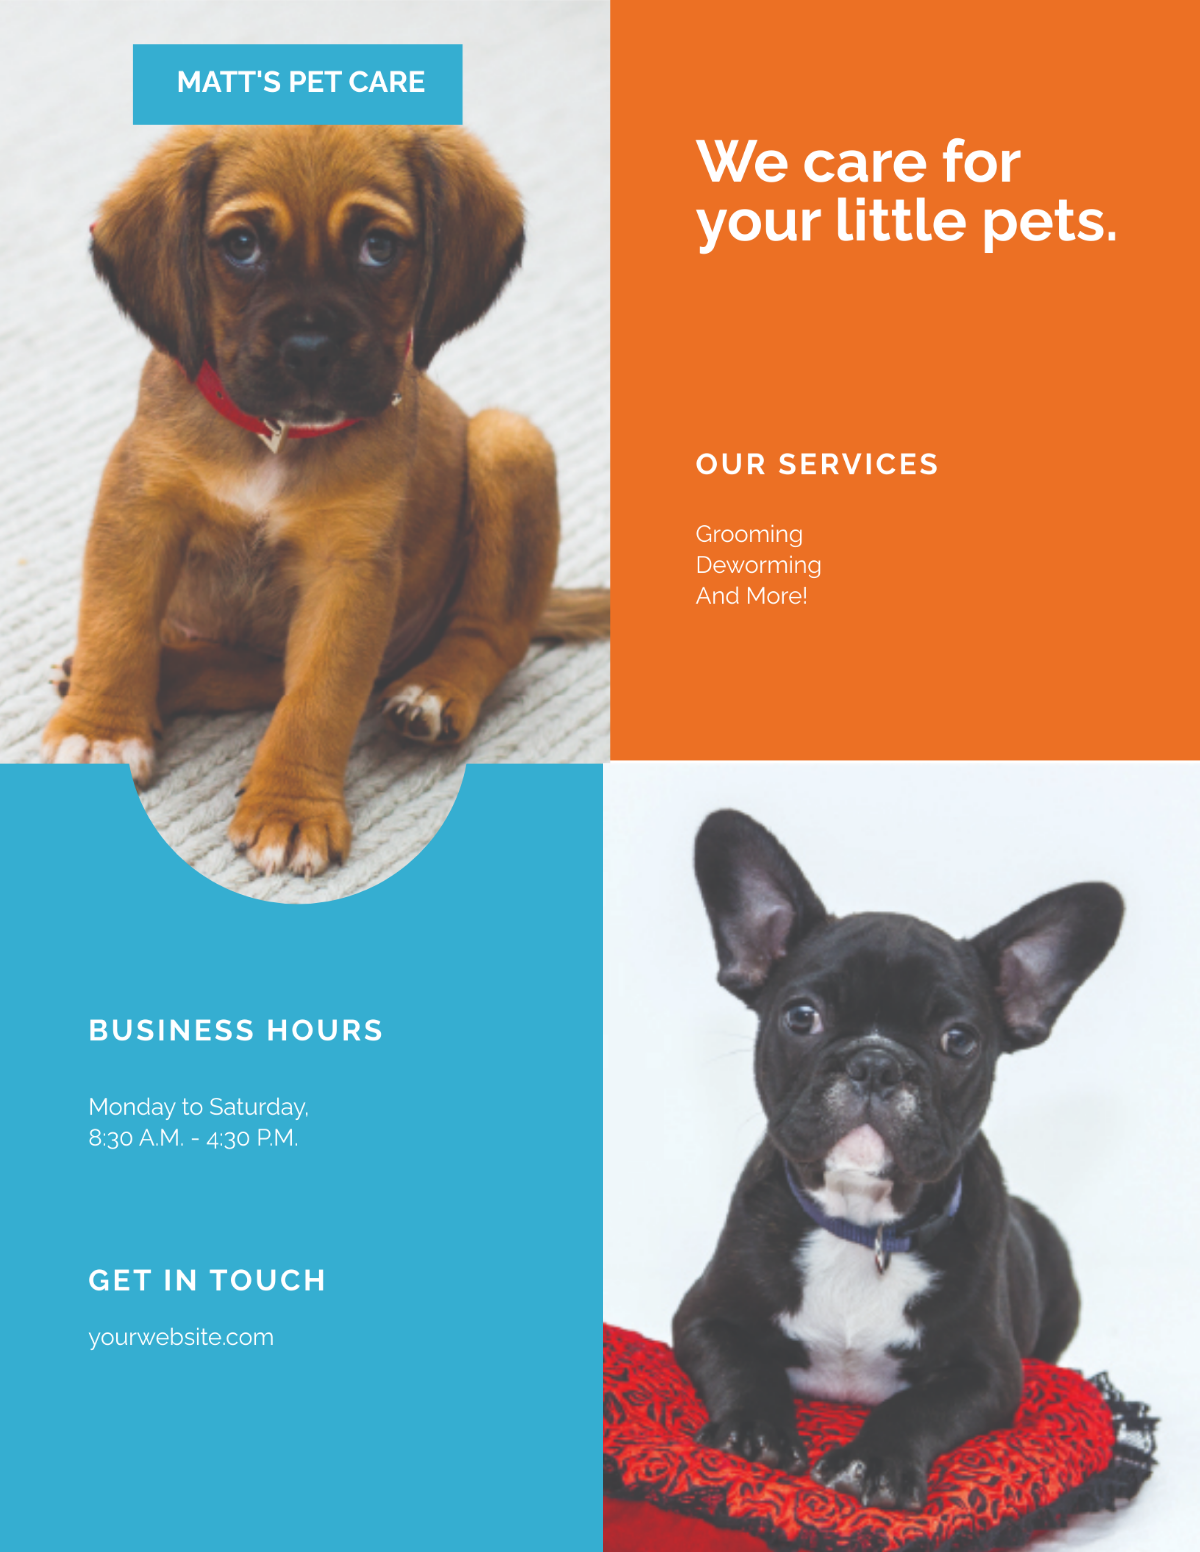 Free Pet Care Flyer Template